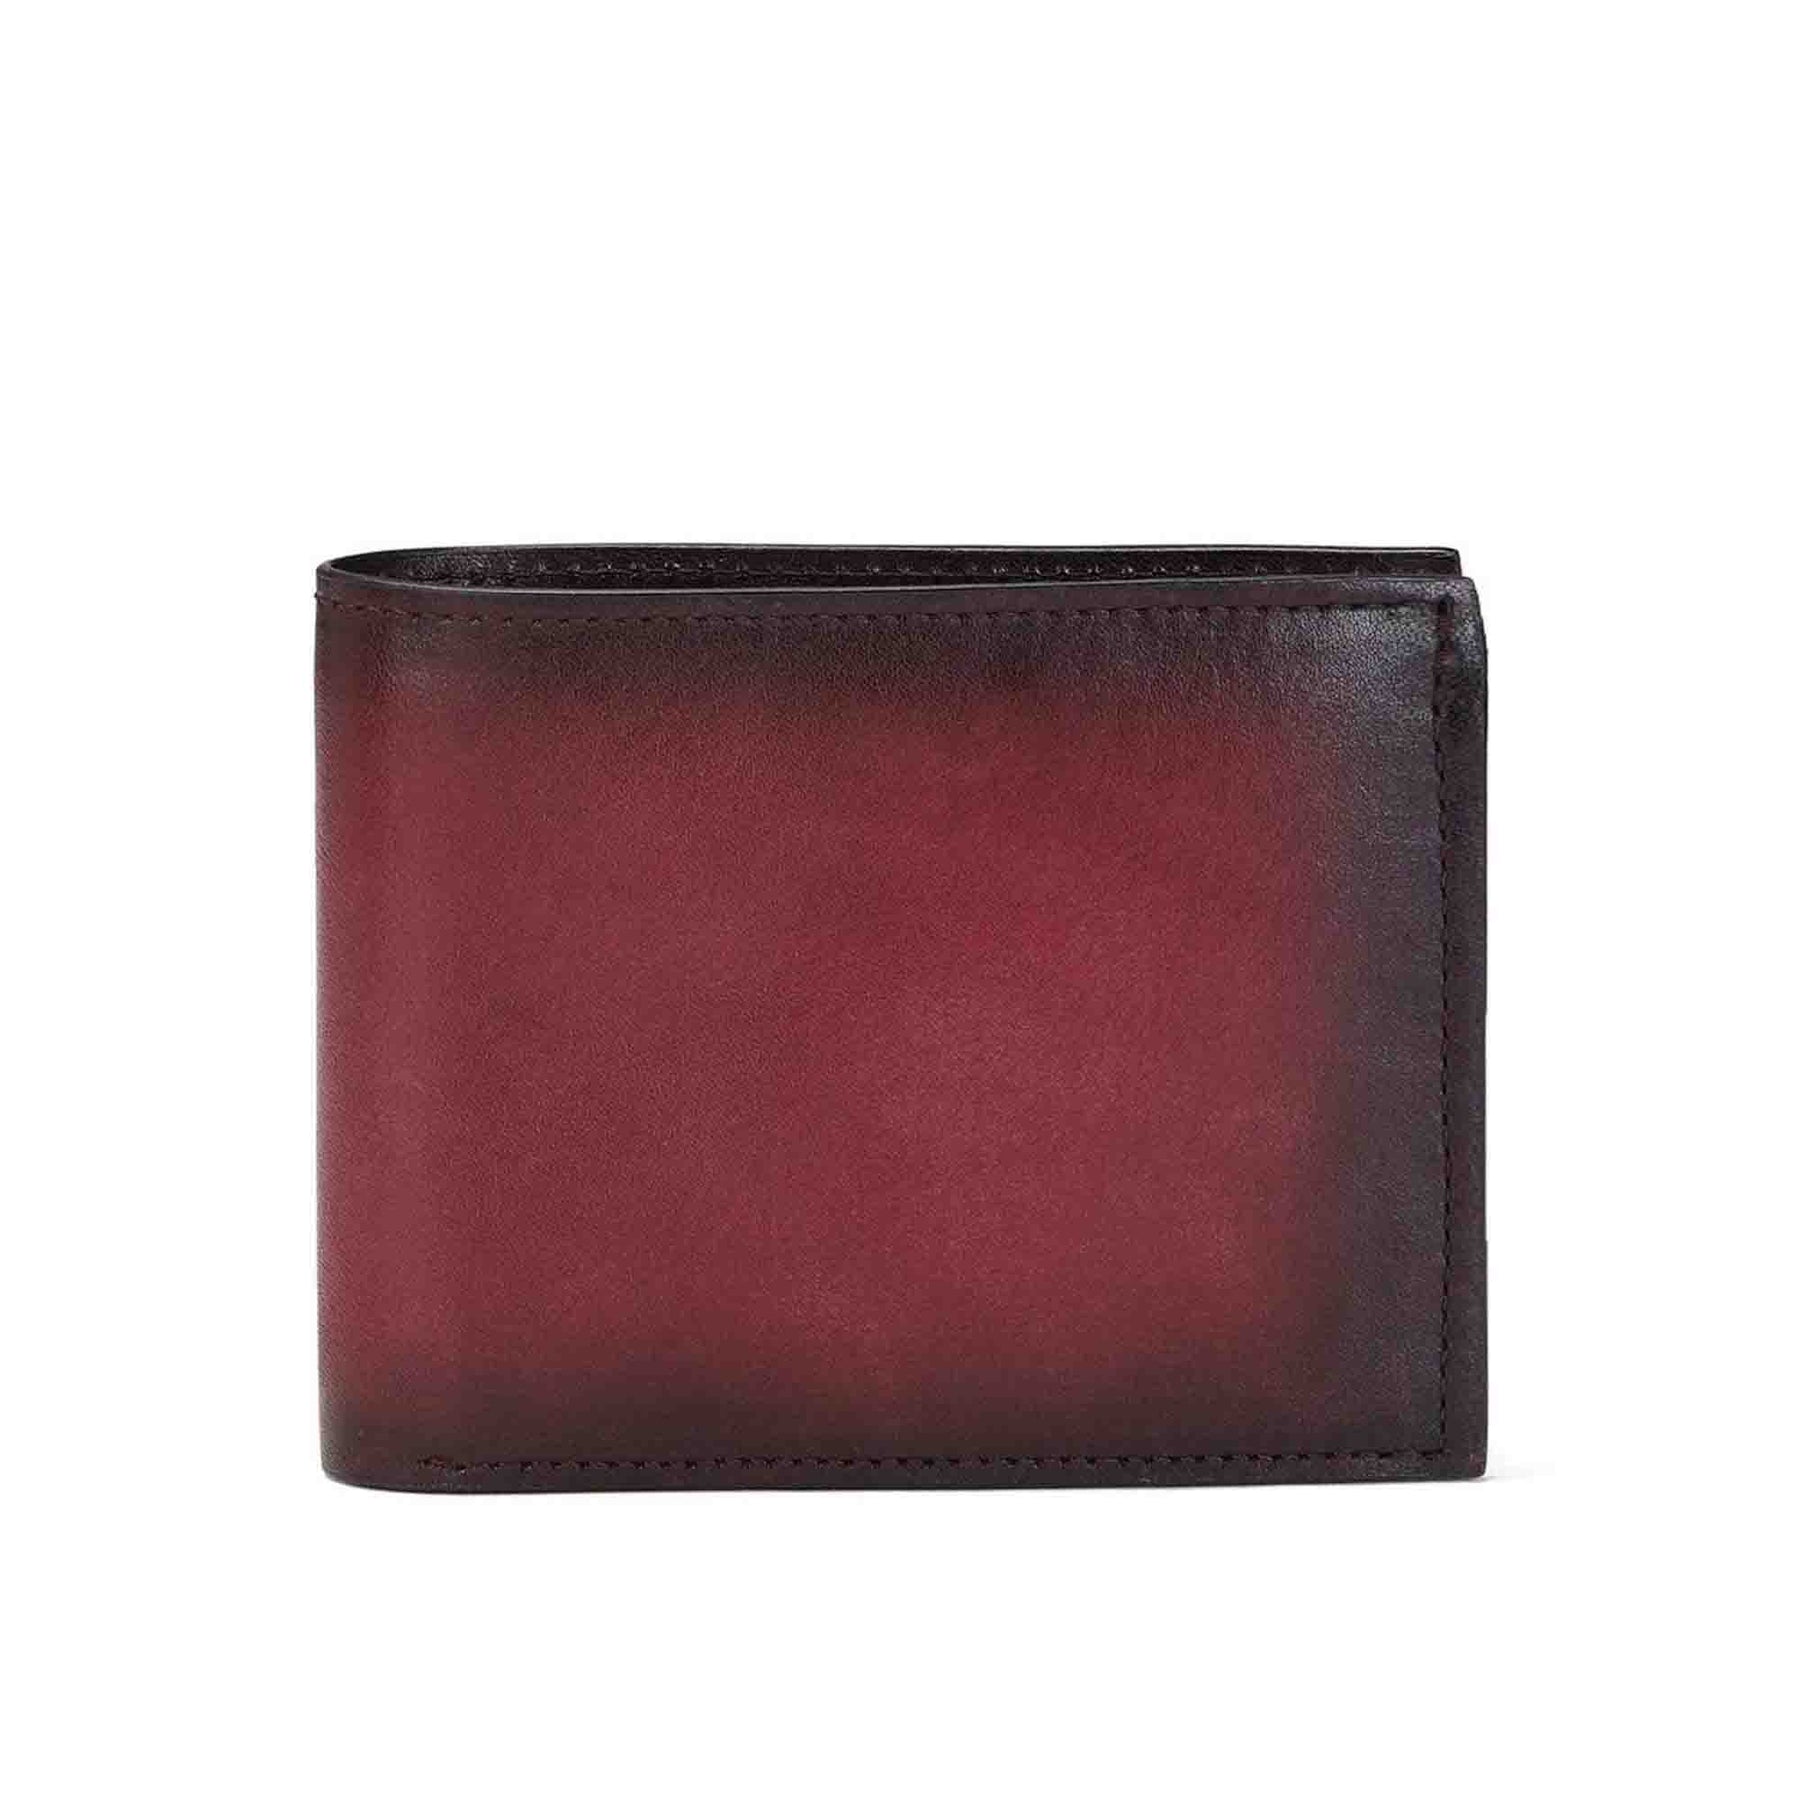 Stylish womens clutch wallet purse for girls ladies red faux leather hand  purse WRLCL RED 703